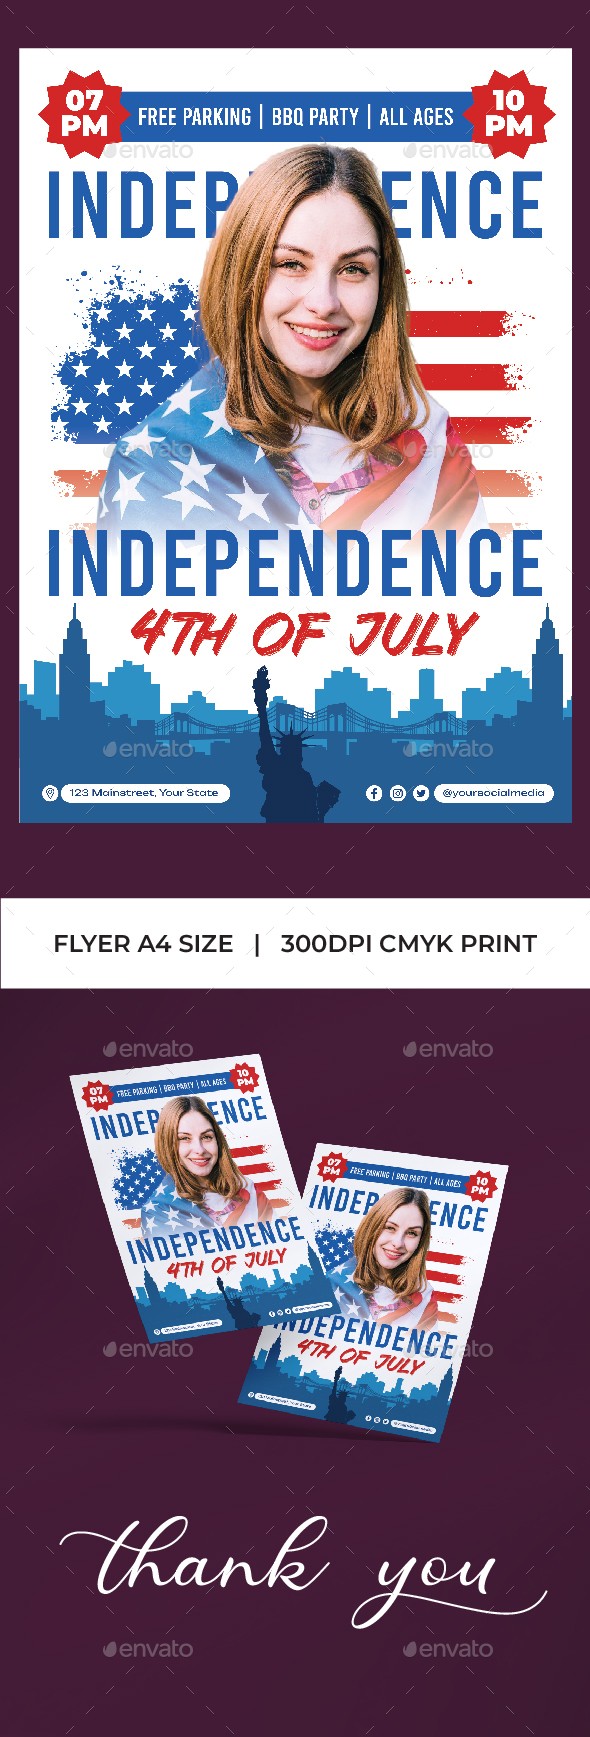 [DOWNLOAD]4th of July Flyer